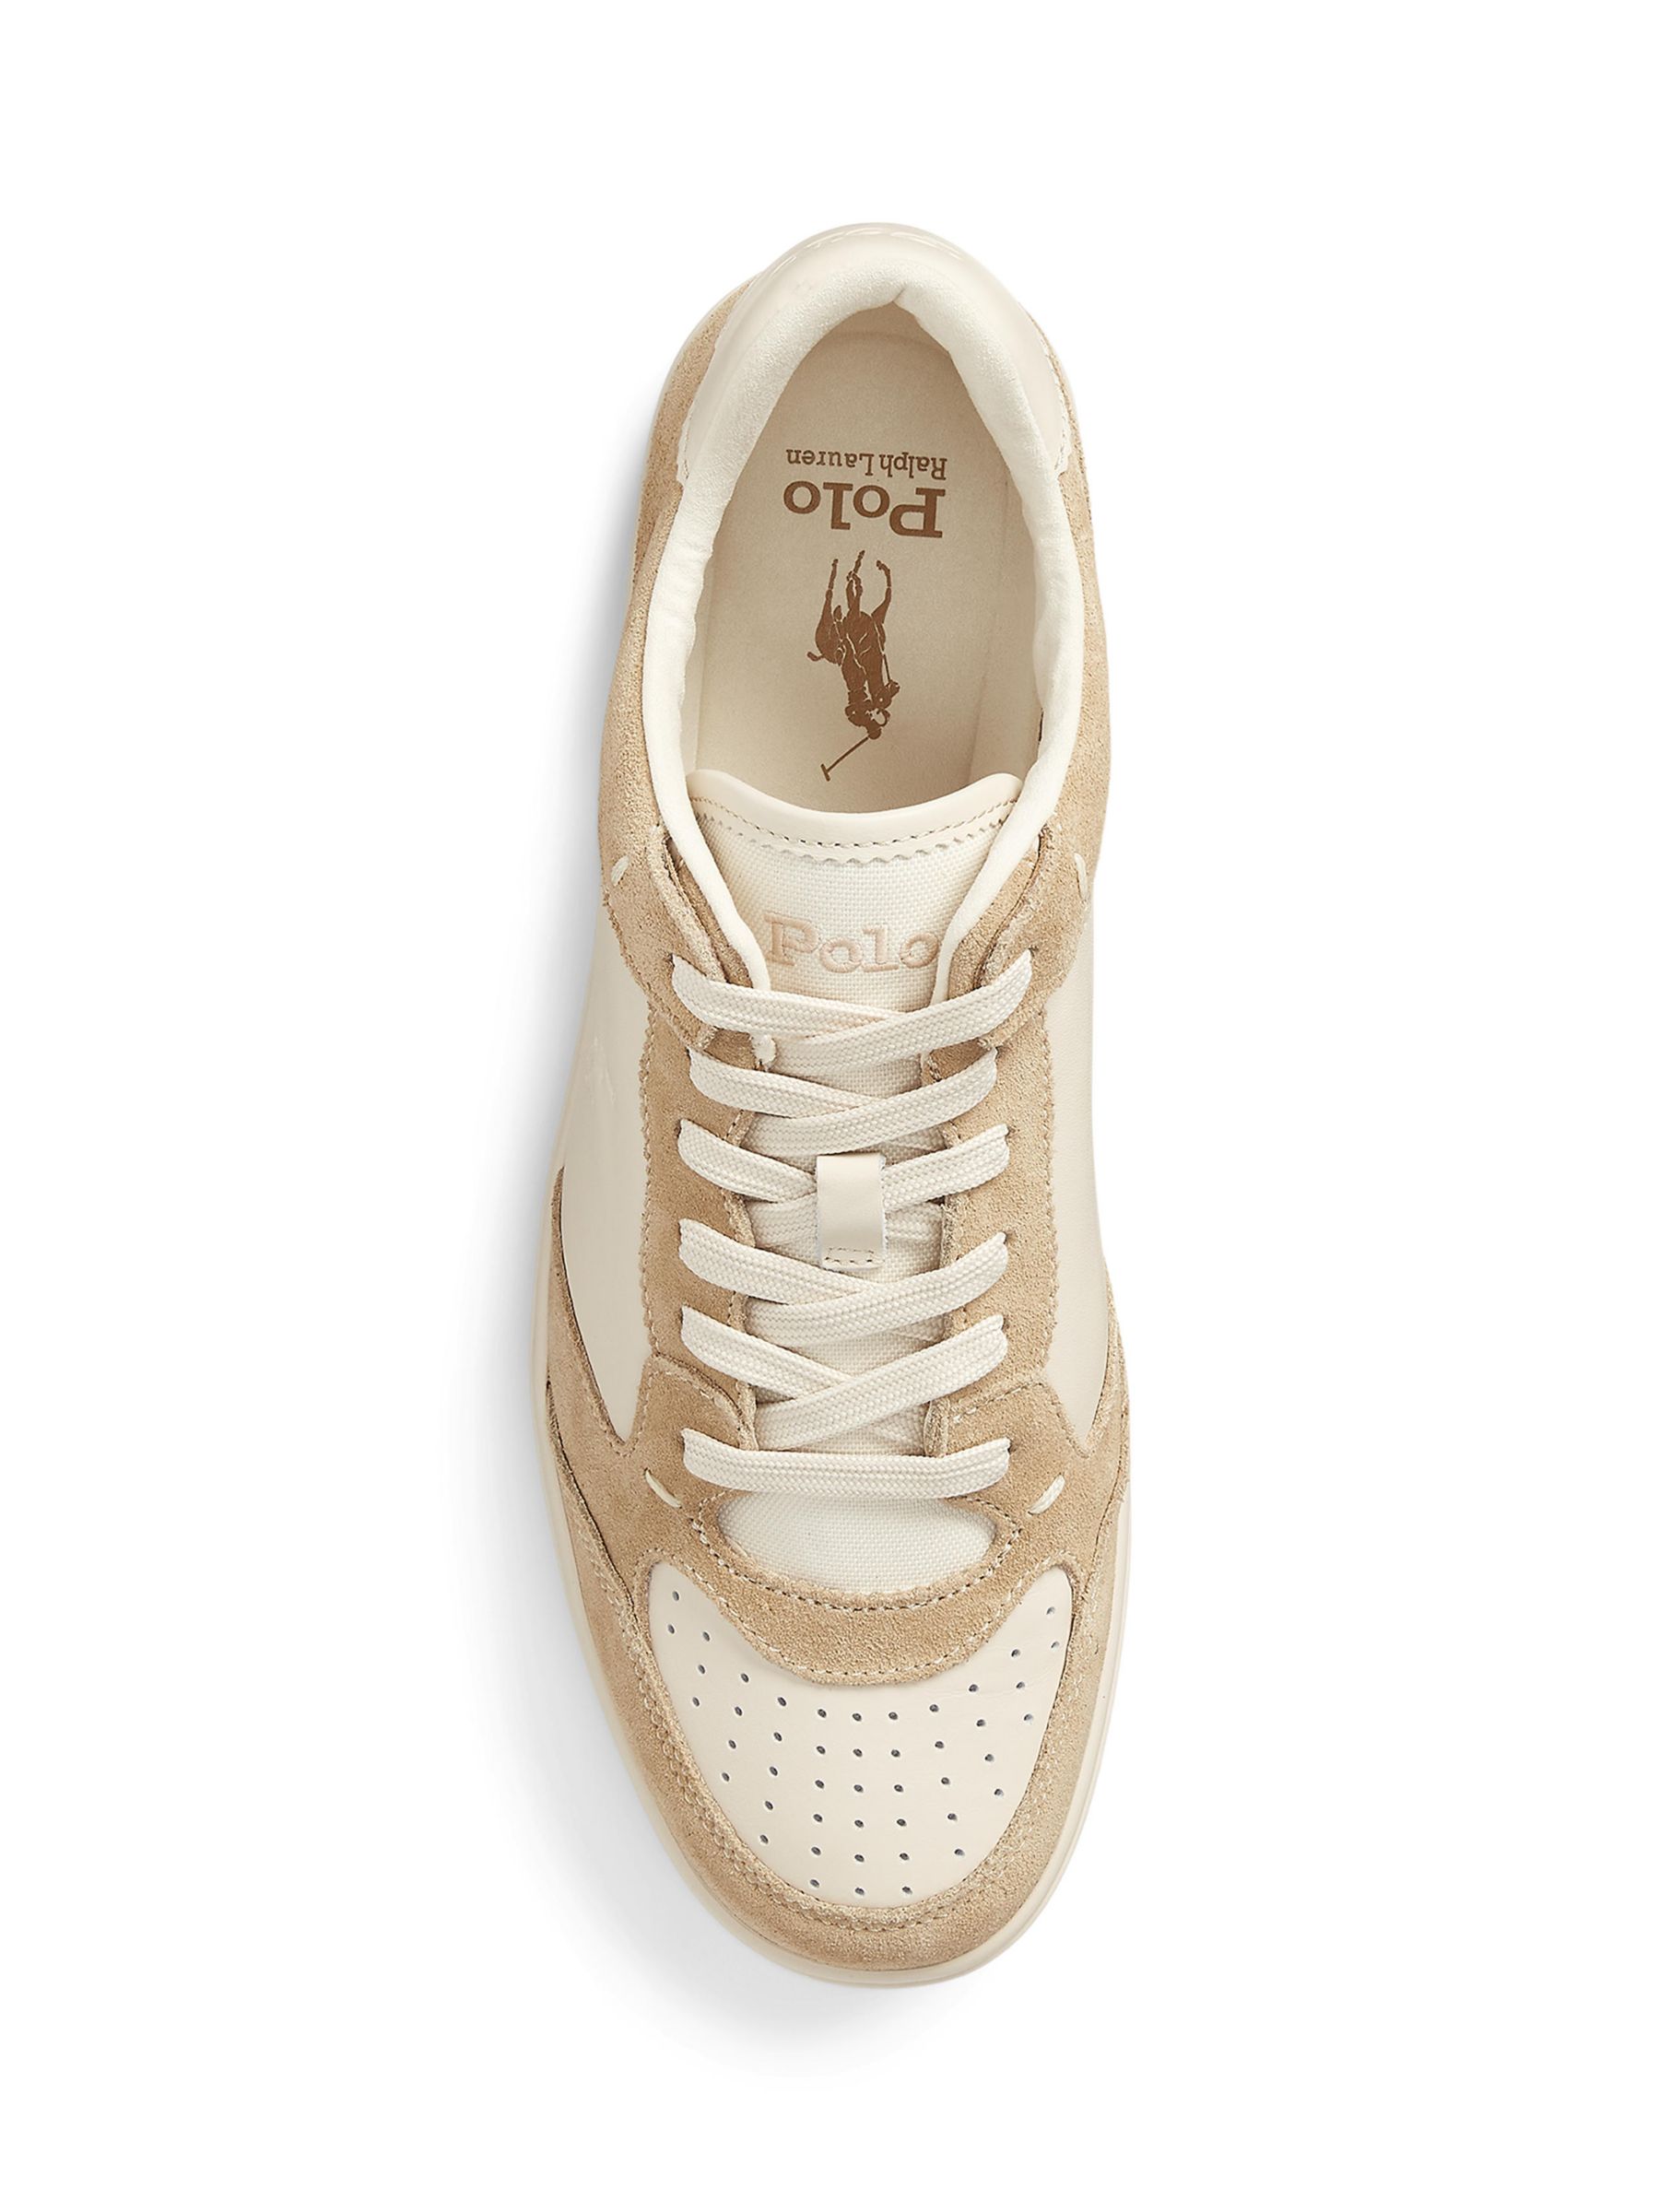 Polo Ralph Lauren Court Luxe Suede Trainers, Bone at John Lewis & Partners